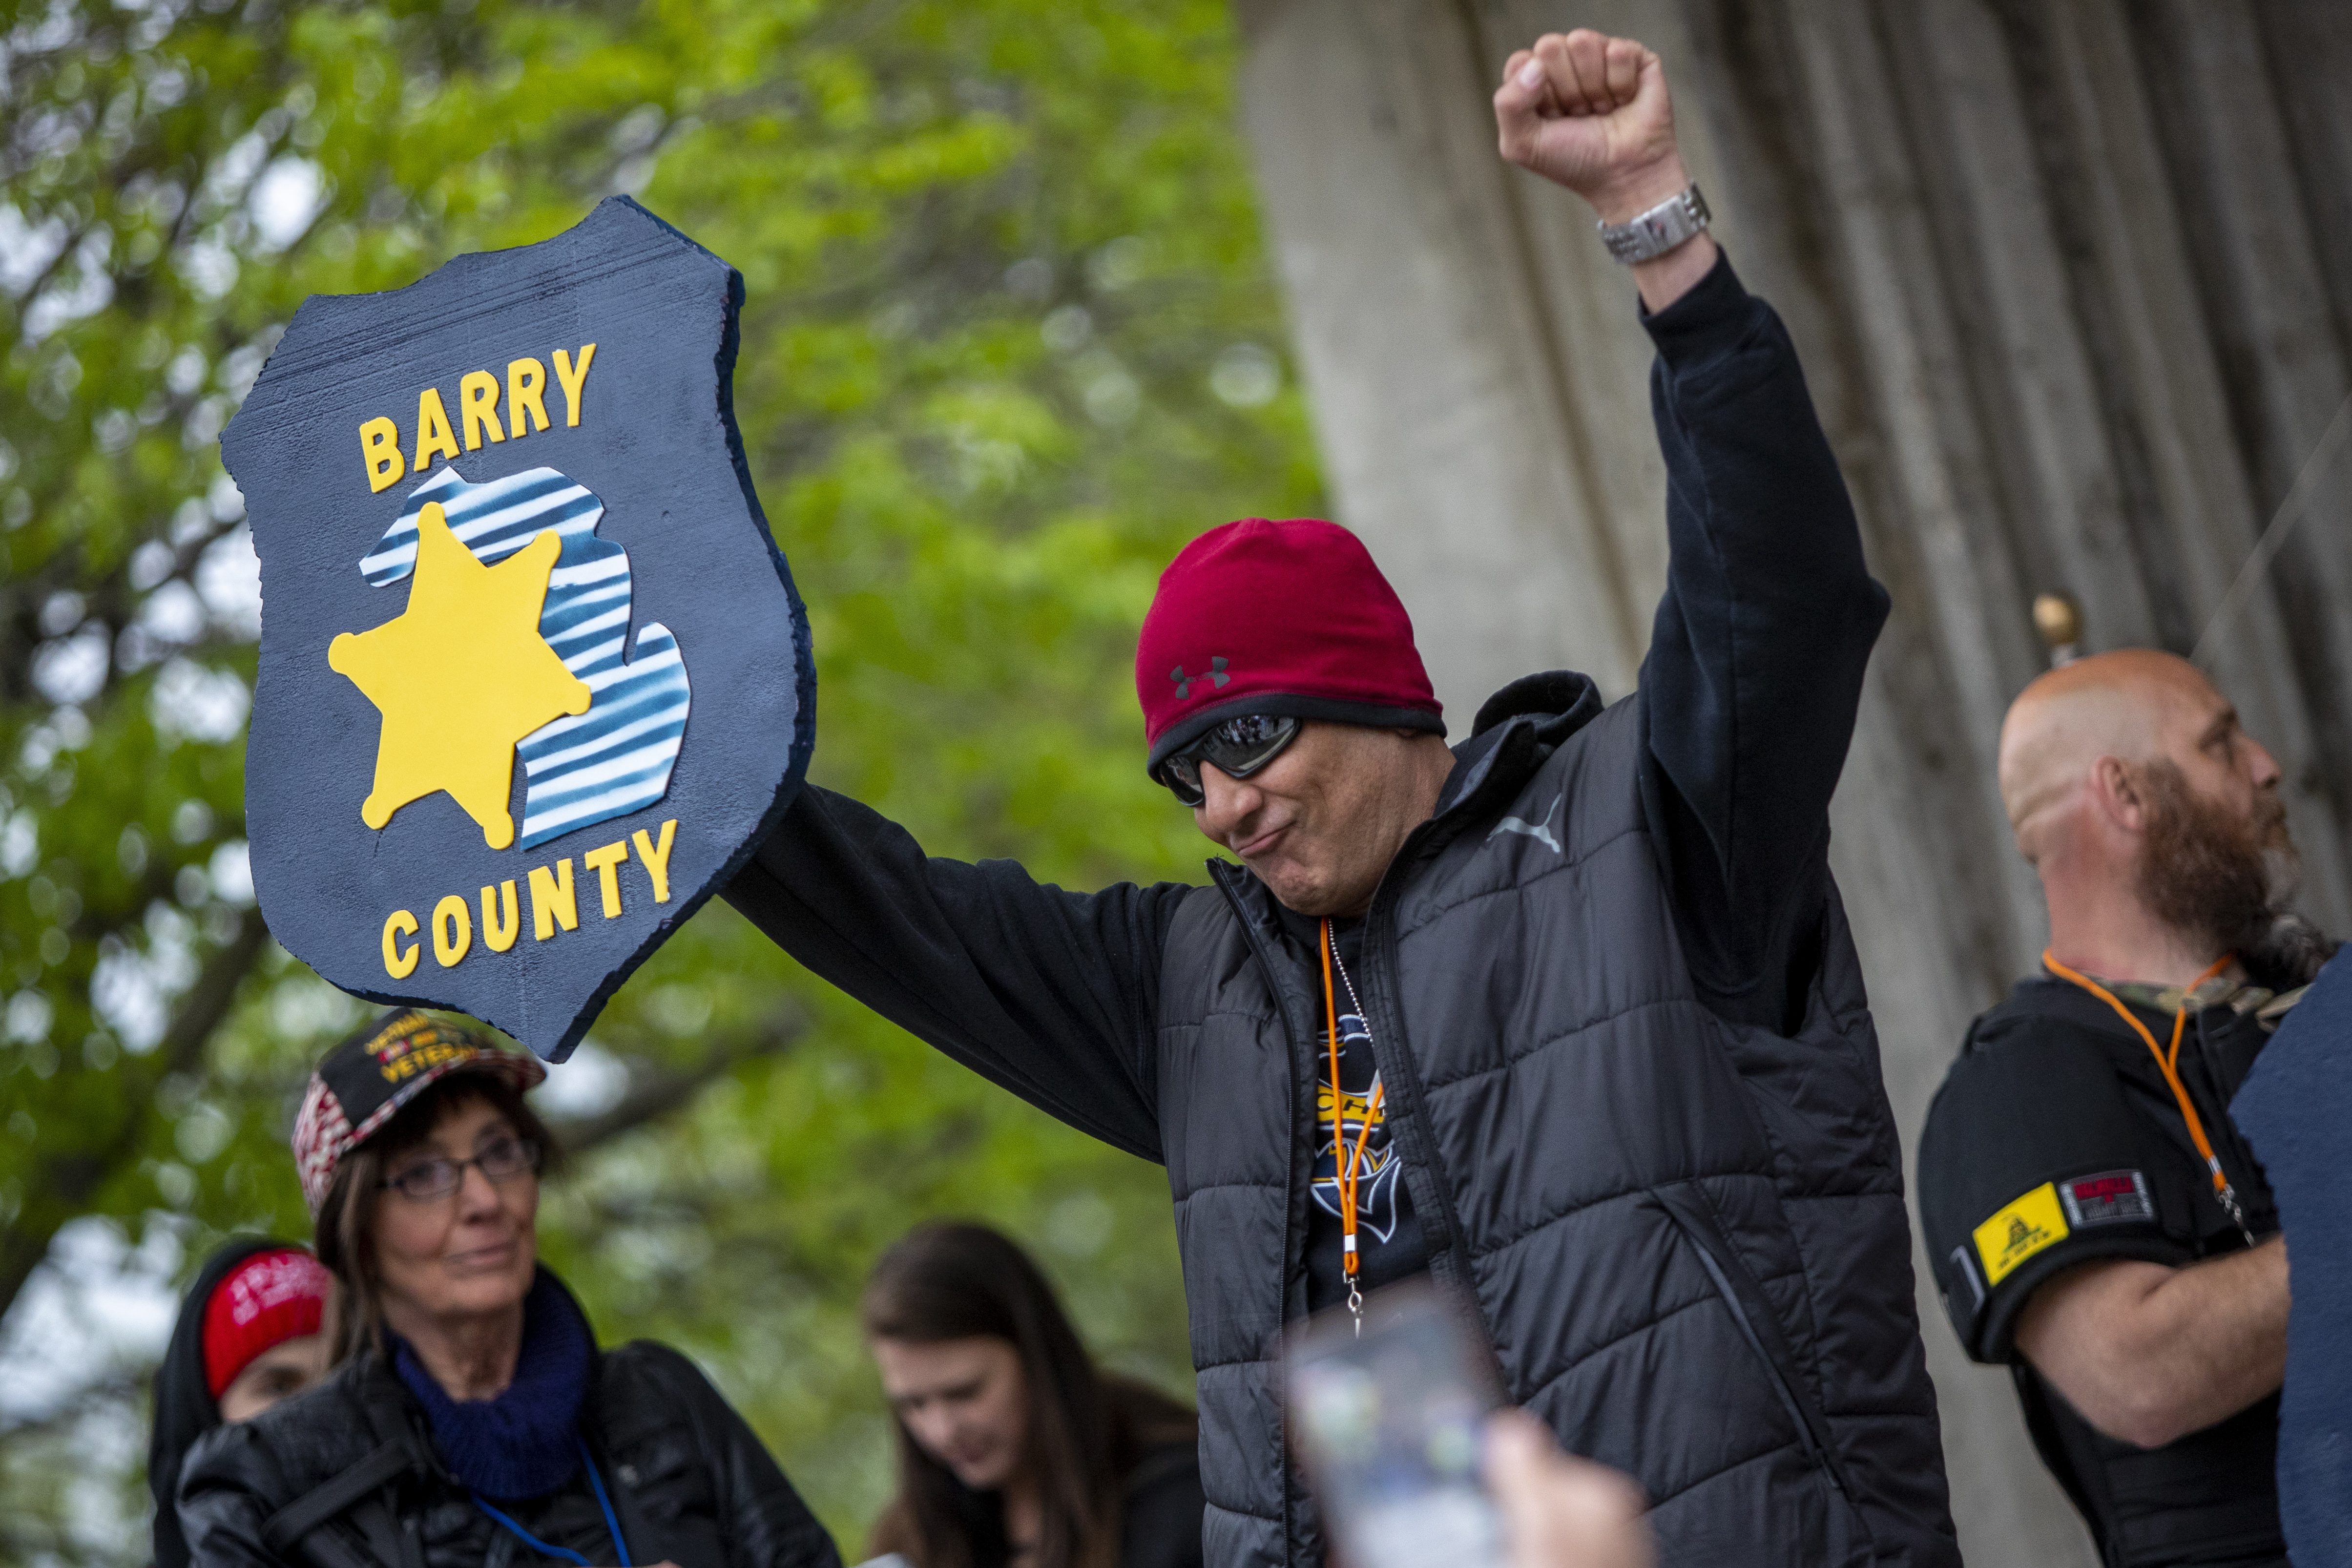 Mark Stevens takes part in the "American Patriot Rally-Sheriffs speak out" event at Rosa Parks Circle in downtown Grand Rapids on Monday, May 18, 2020. The crowd is protesting against Gov. Gretchen Whitmer's stay-at-home order. (Cory Morse | MLive.com)